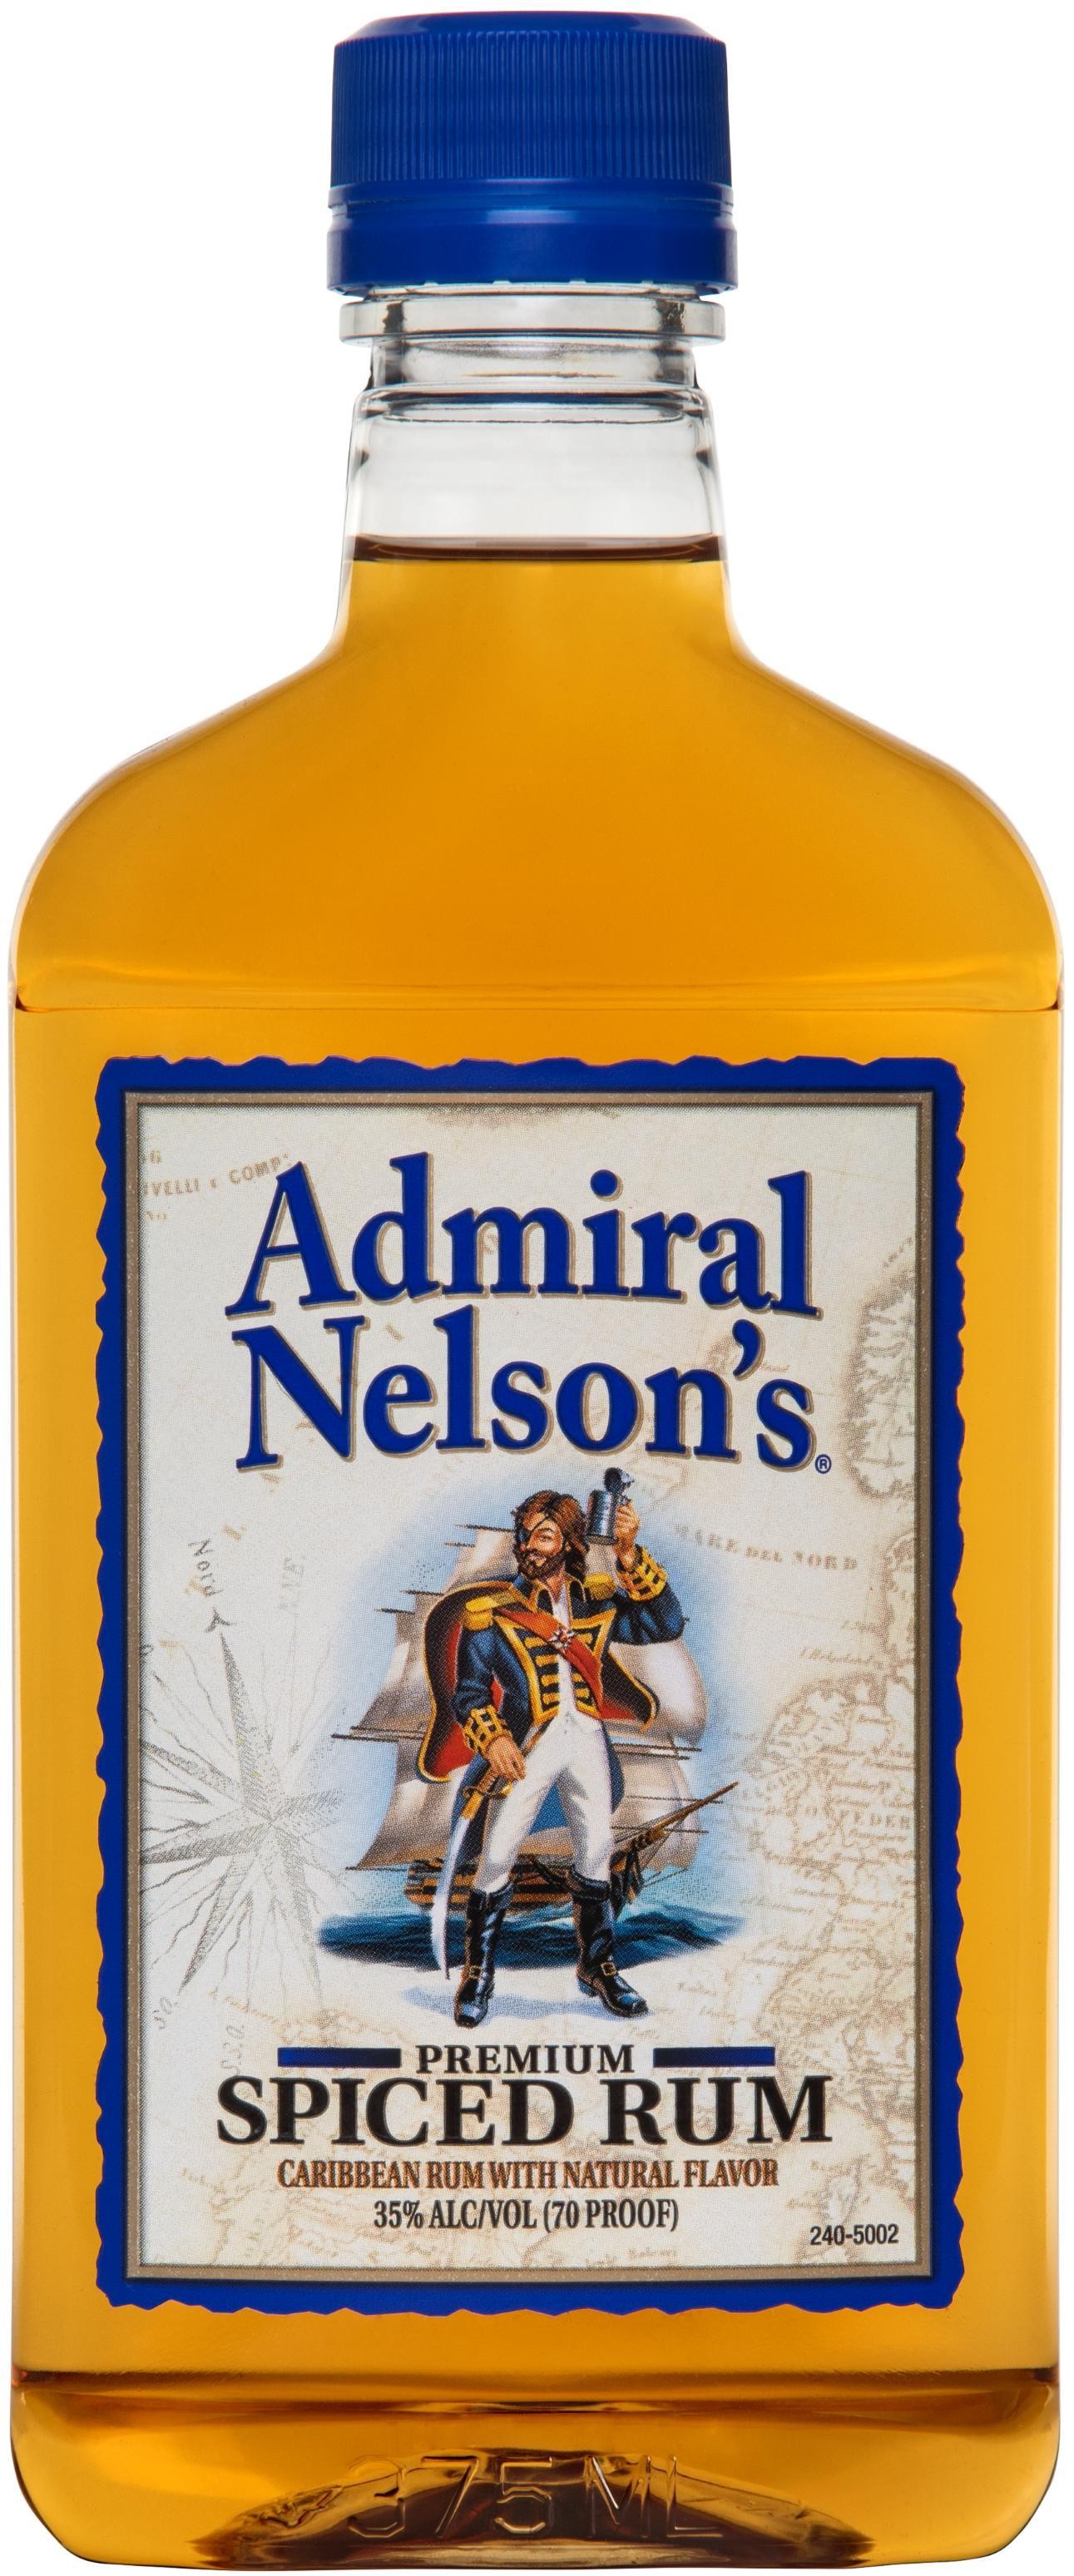 Admiral Nelsons Admiral Nelson Spiced Rum 375ml